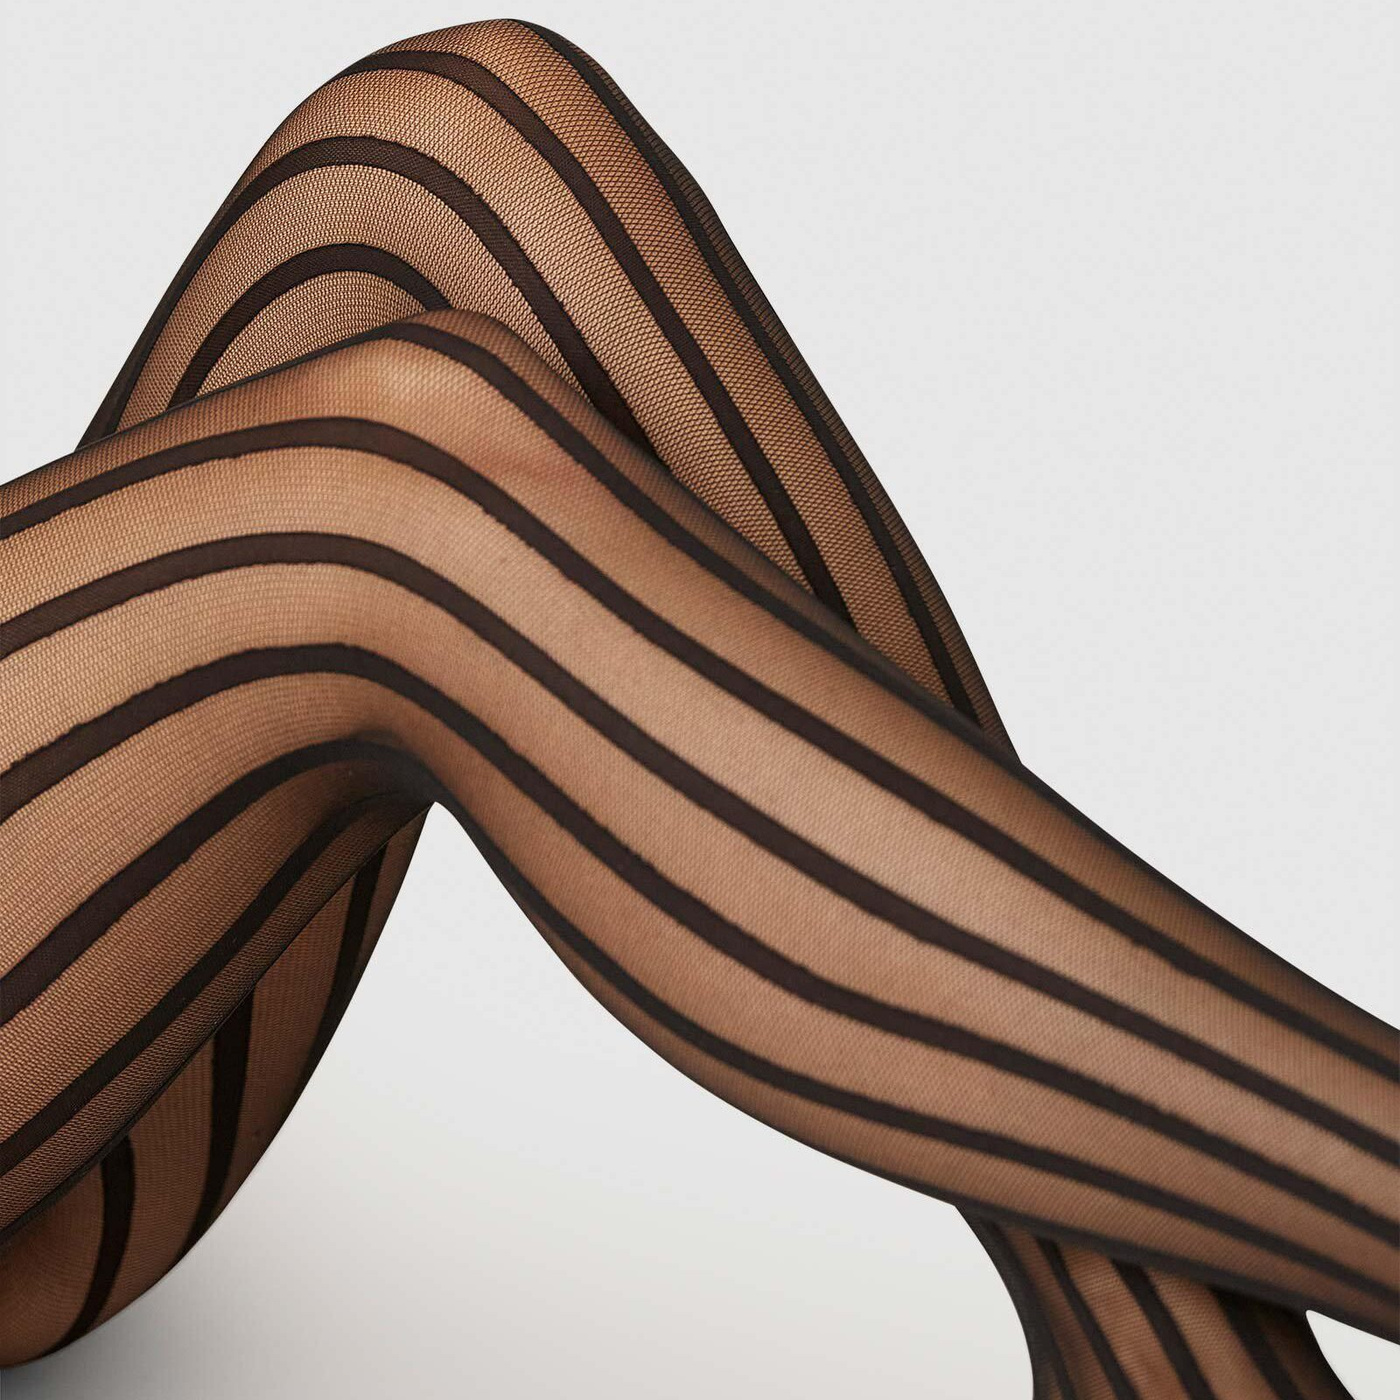 Semi-sheer Siri Tights takes stripes to the next level. Dress them up or down for a statement-making look. Sustainability and quality goes hand in hand.